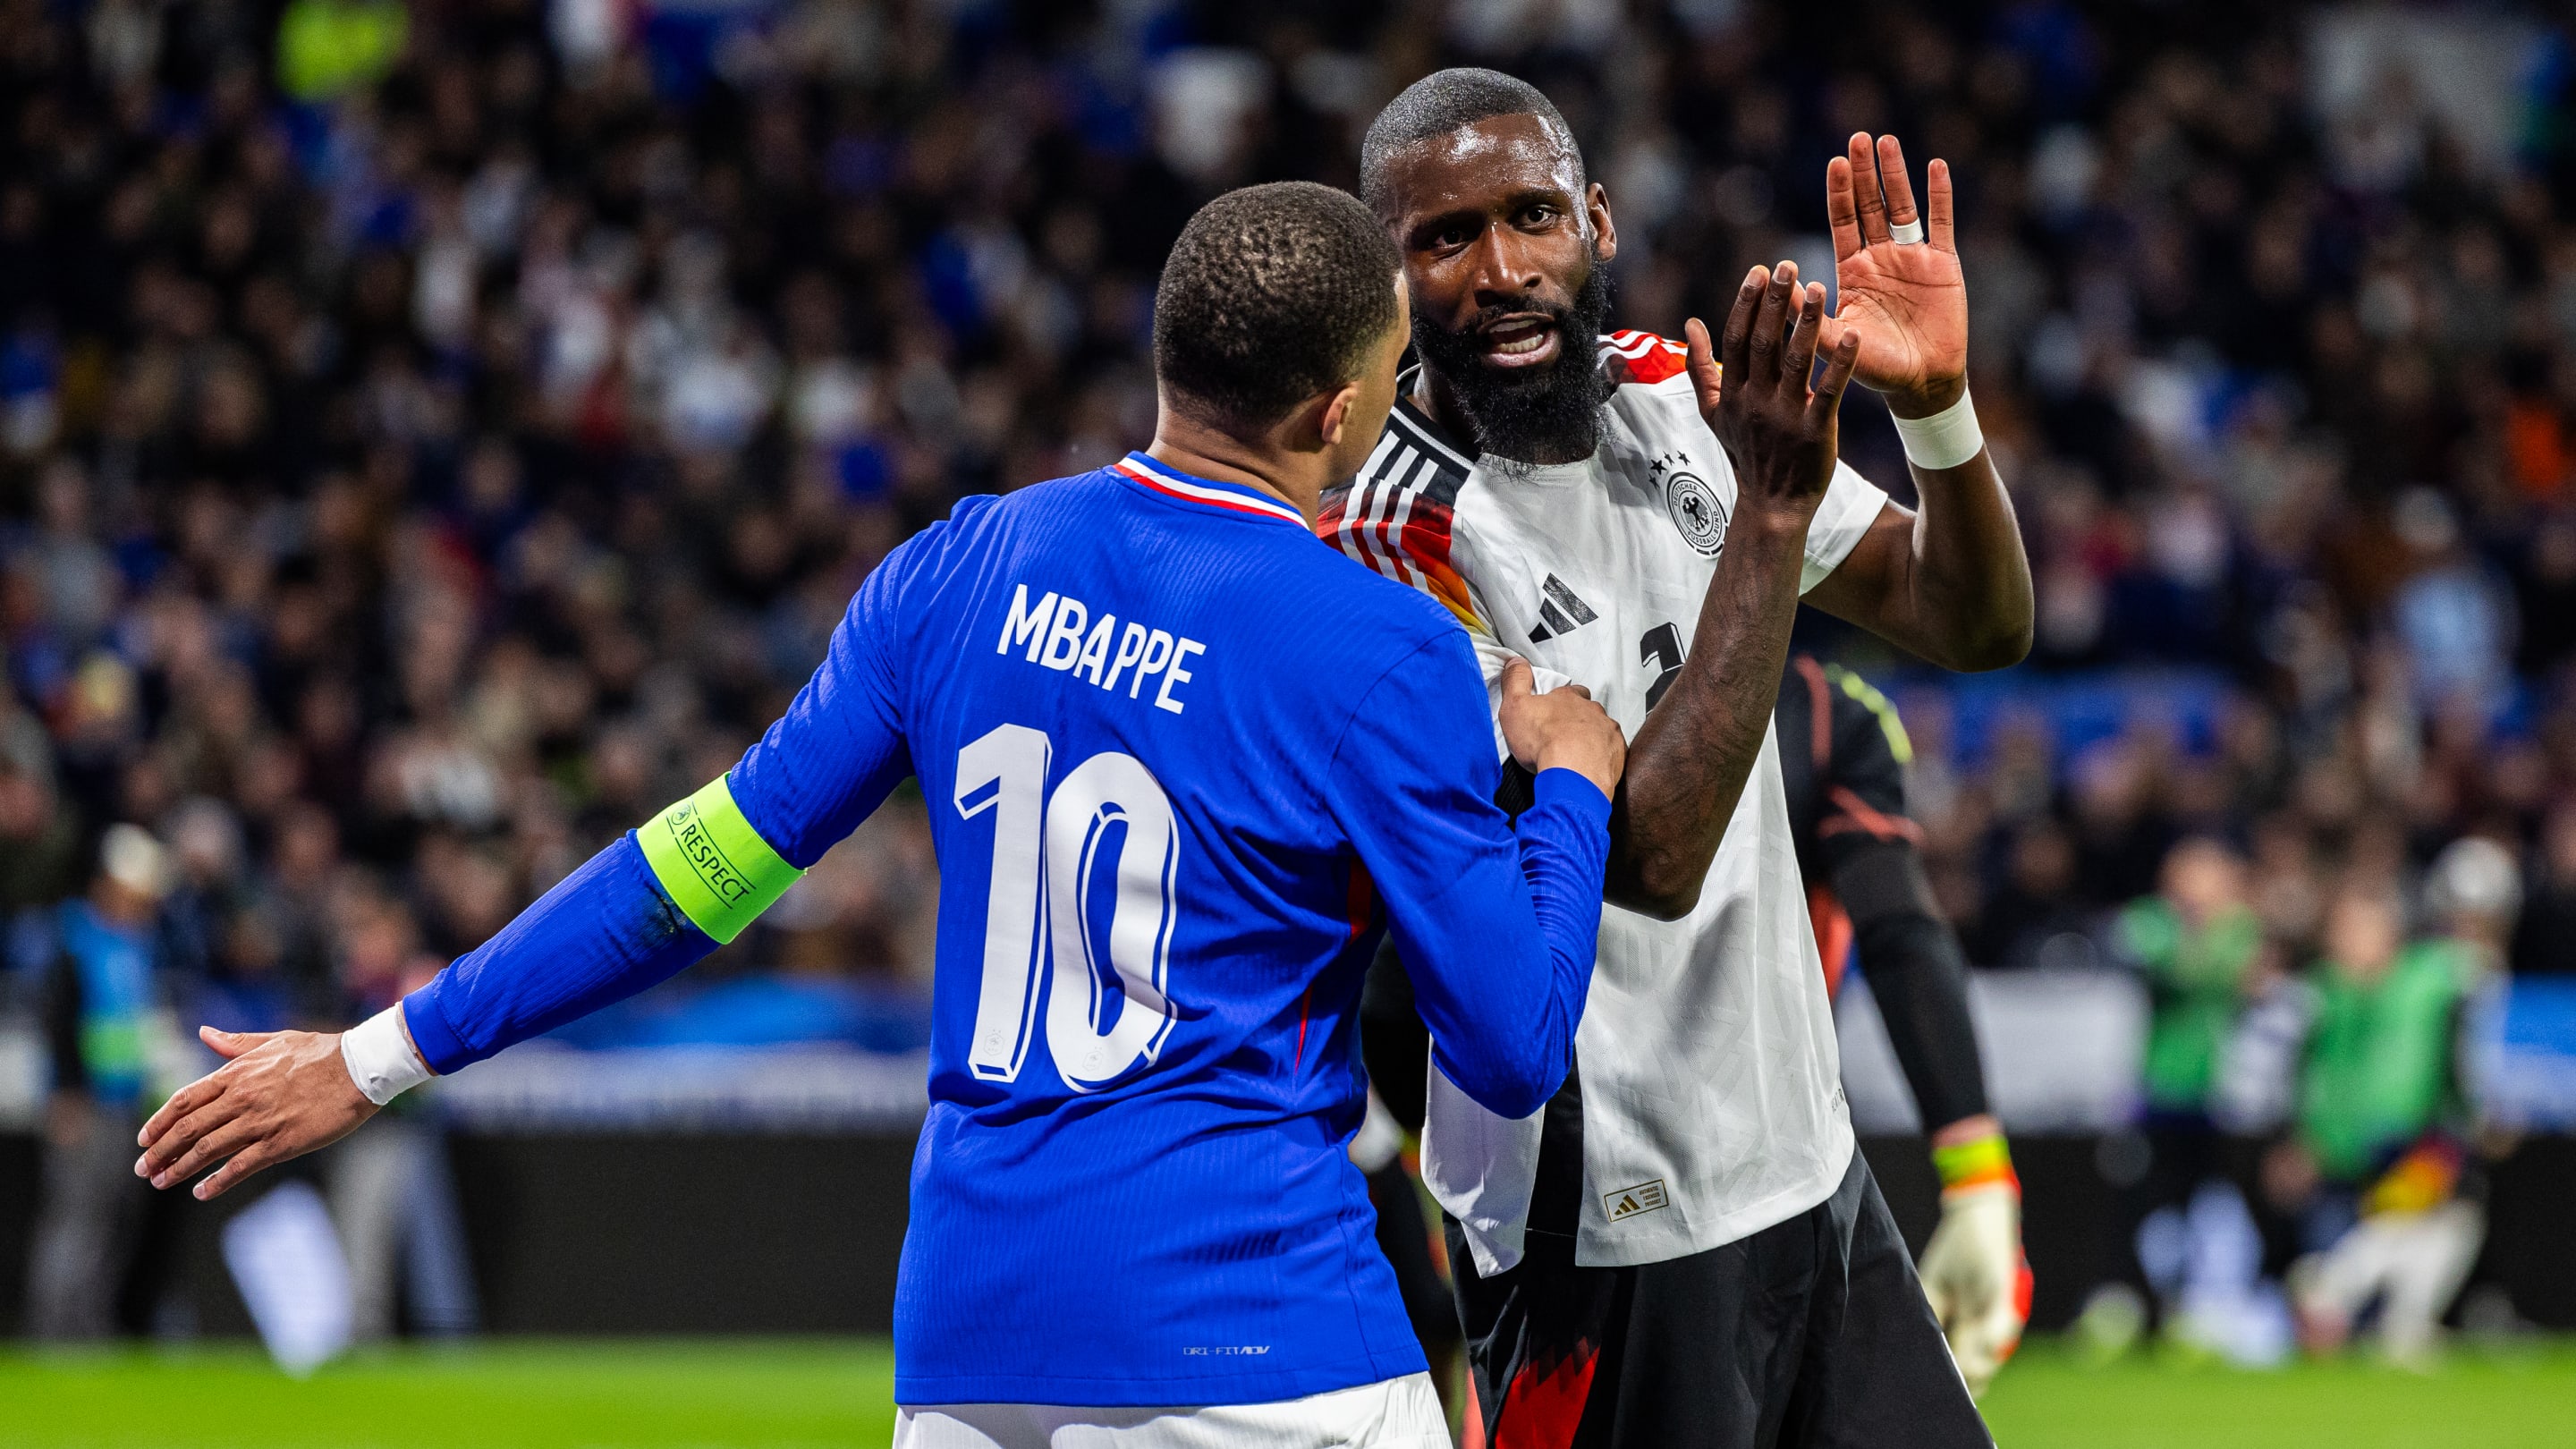 Antonio Rudiger vows to 'smash' Kylian Mbappe in Champions League final